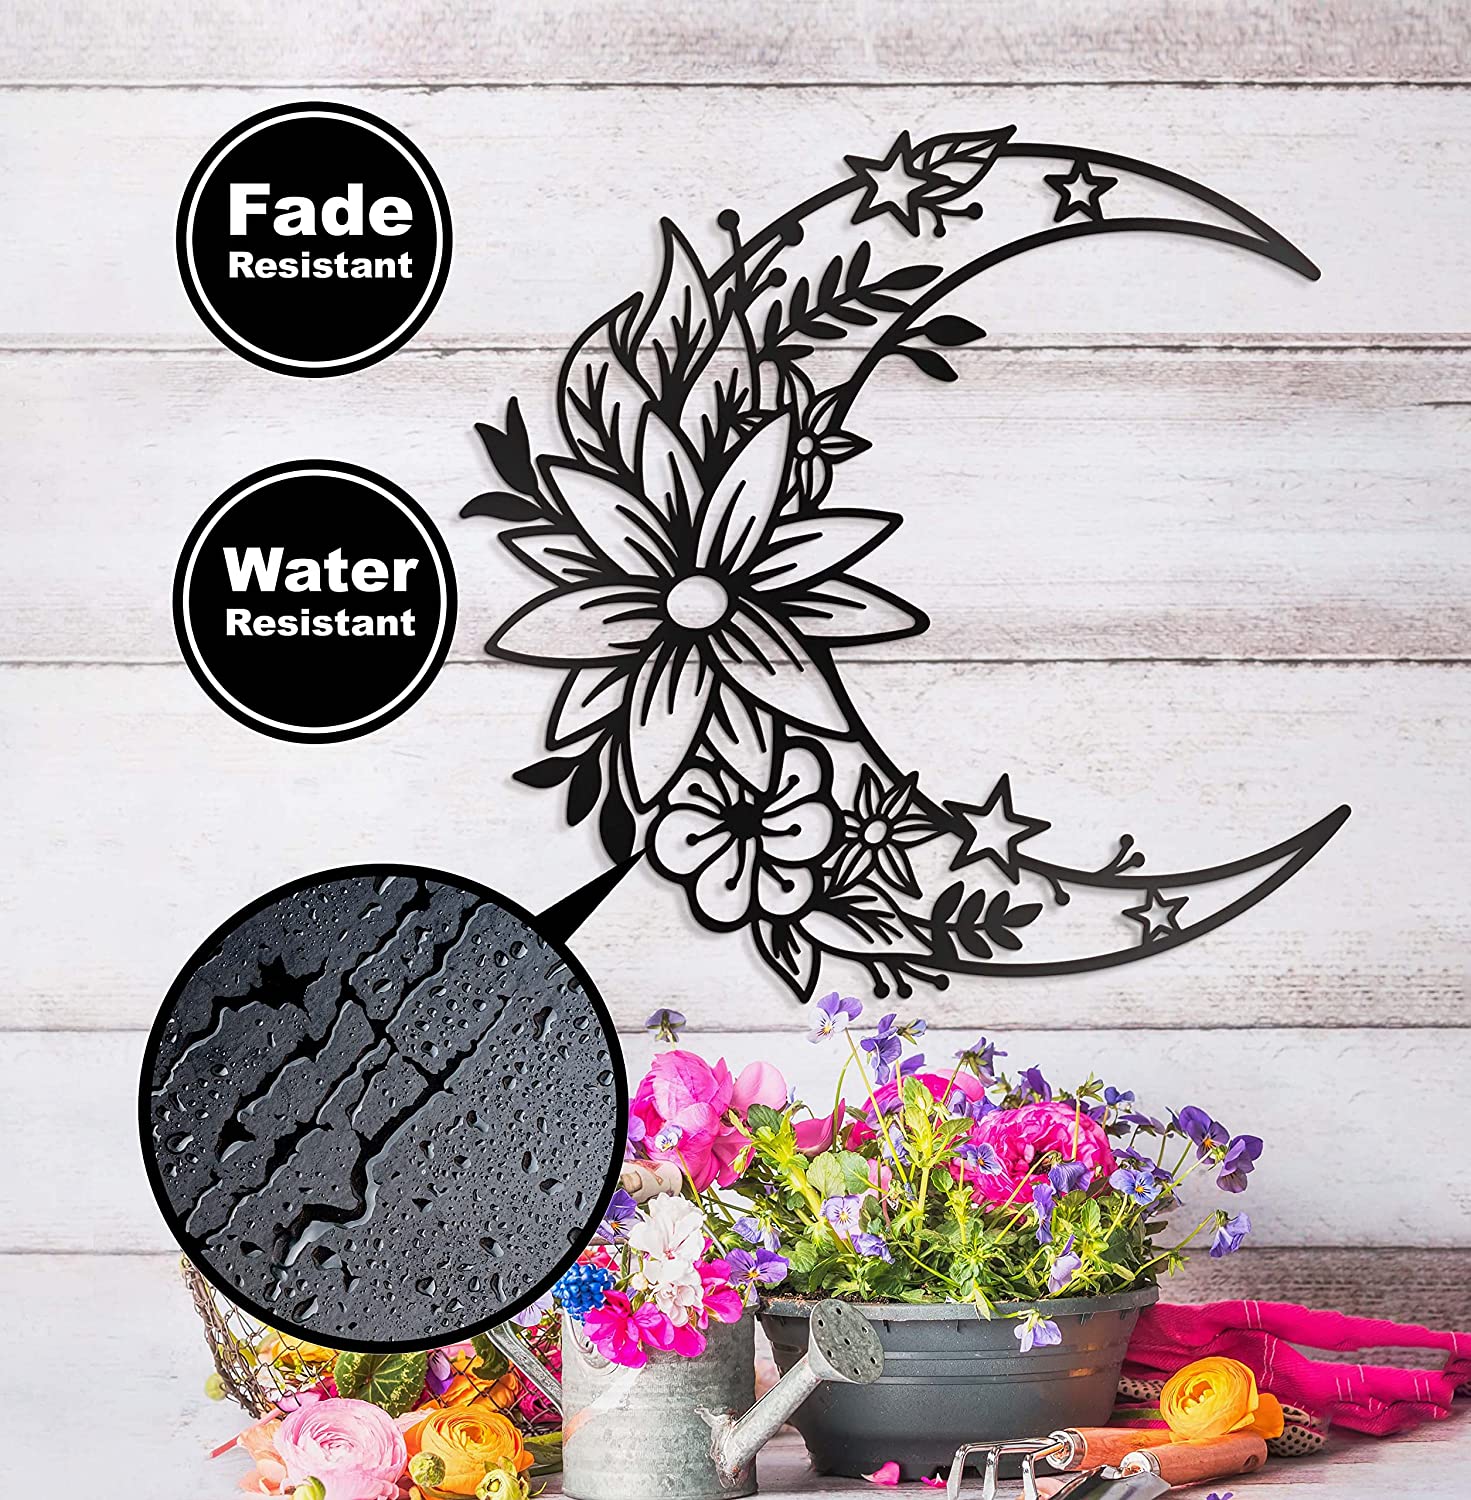 Moon Metal Floral Art Decor - 14"X13.5" Black Phase Wall signs for Half Moon Flower Sculpture Hanging Wall Decor for Bedroom